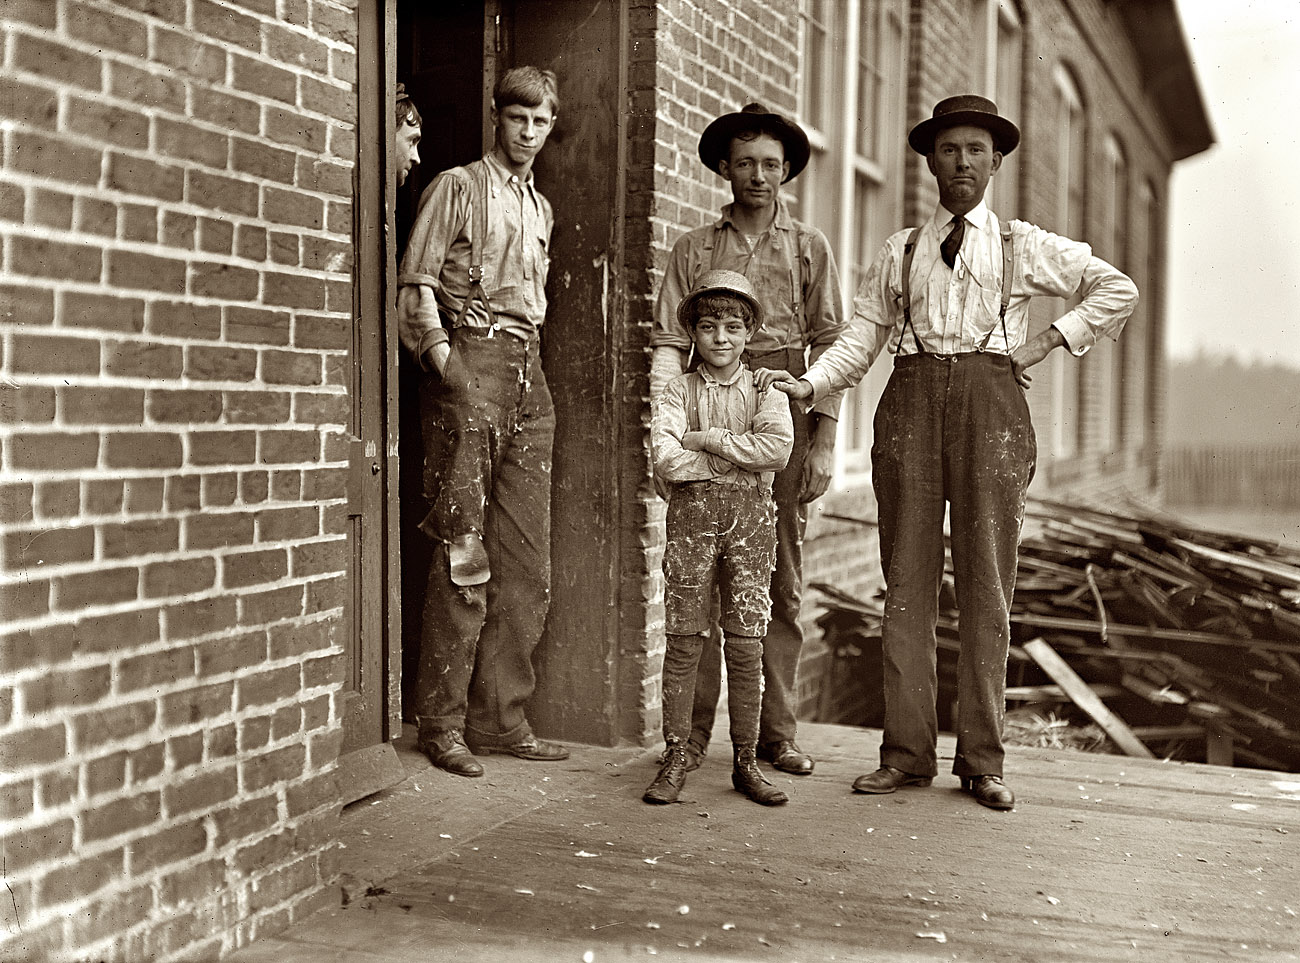 January 1909. Macon, Georgia. "This boy has worked in Payne Cotton Mill for 2 yrs. Runs four sides and earns 52 cents a day. Overseer has hand on boy's shoulder. He said this mill made 70% profit last year and expects to make 100% this year. Owned by Bibb Mfg. Co." View full size. Photo by Lewis Wickes Hine.